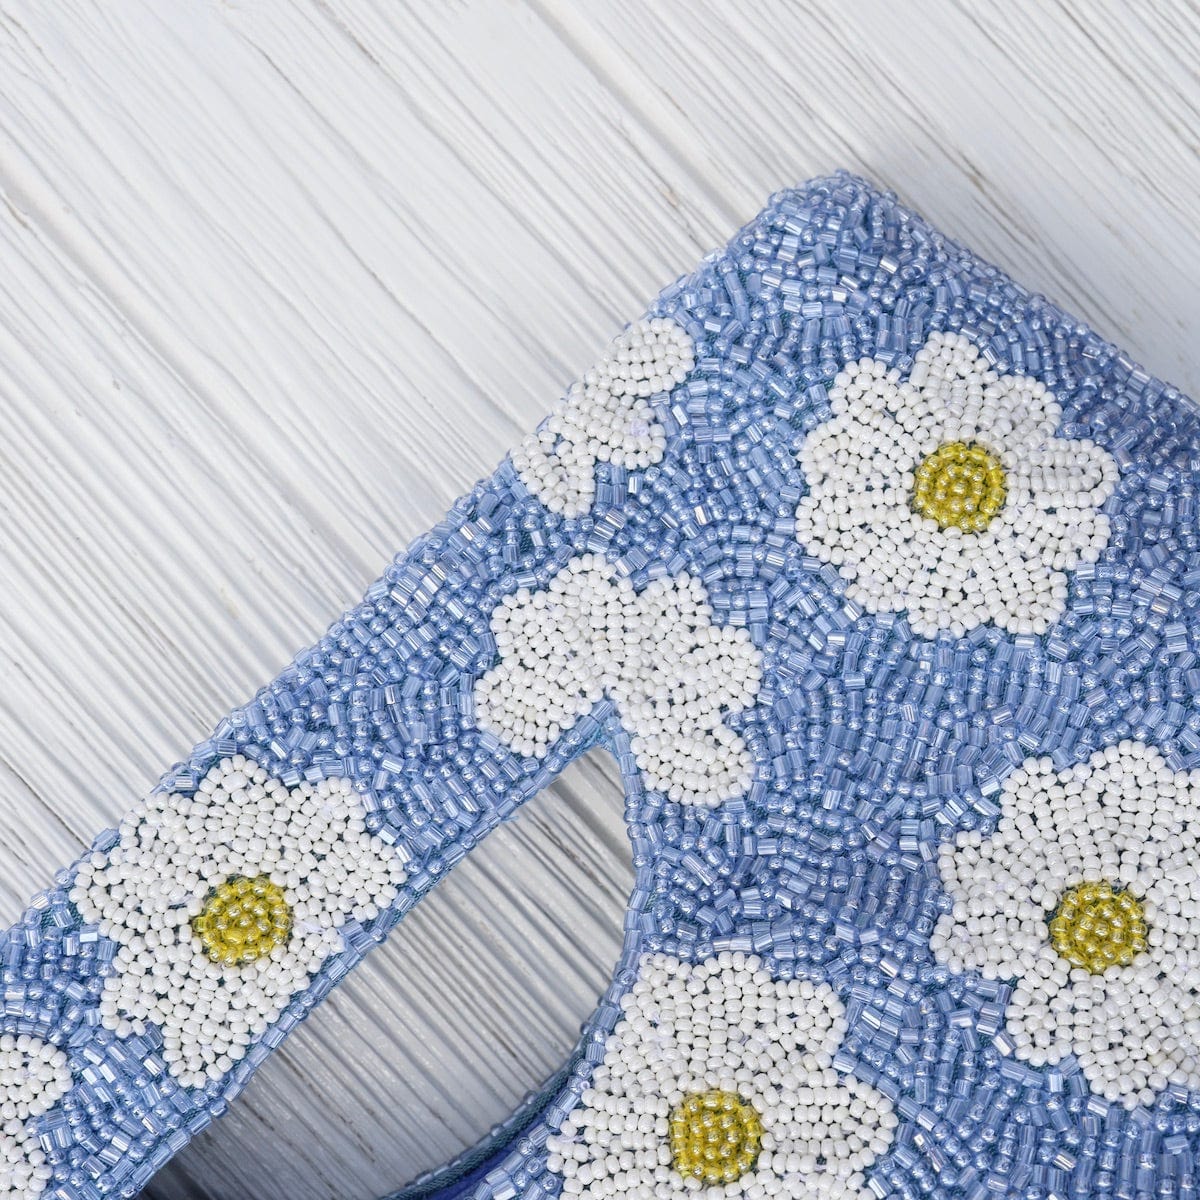 BAG Cut Out Handle Clutch in Blue with White Daisies